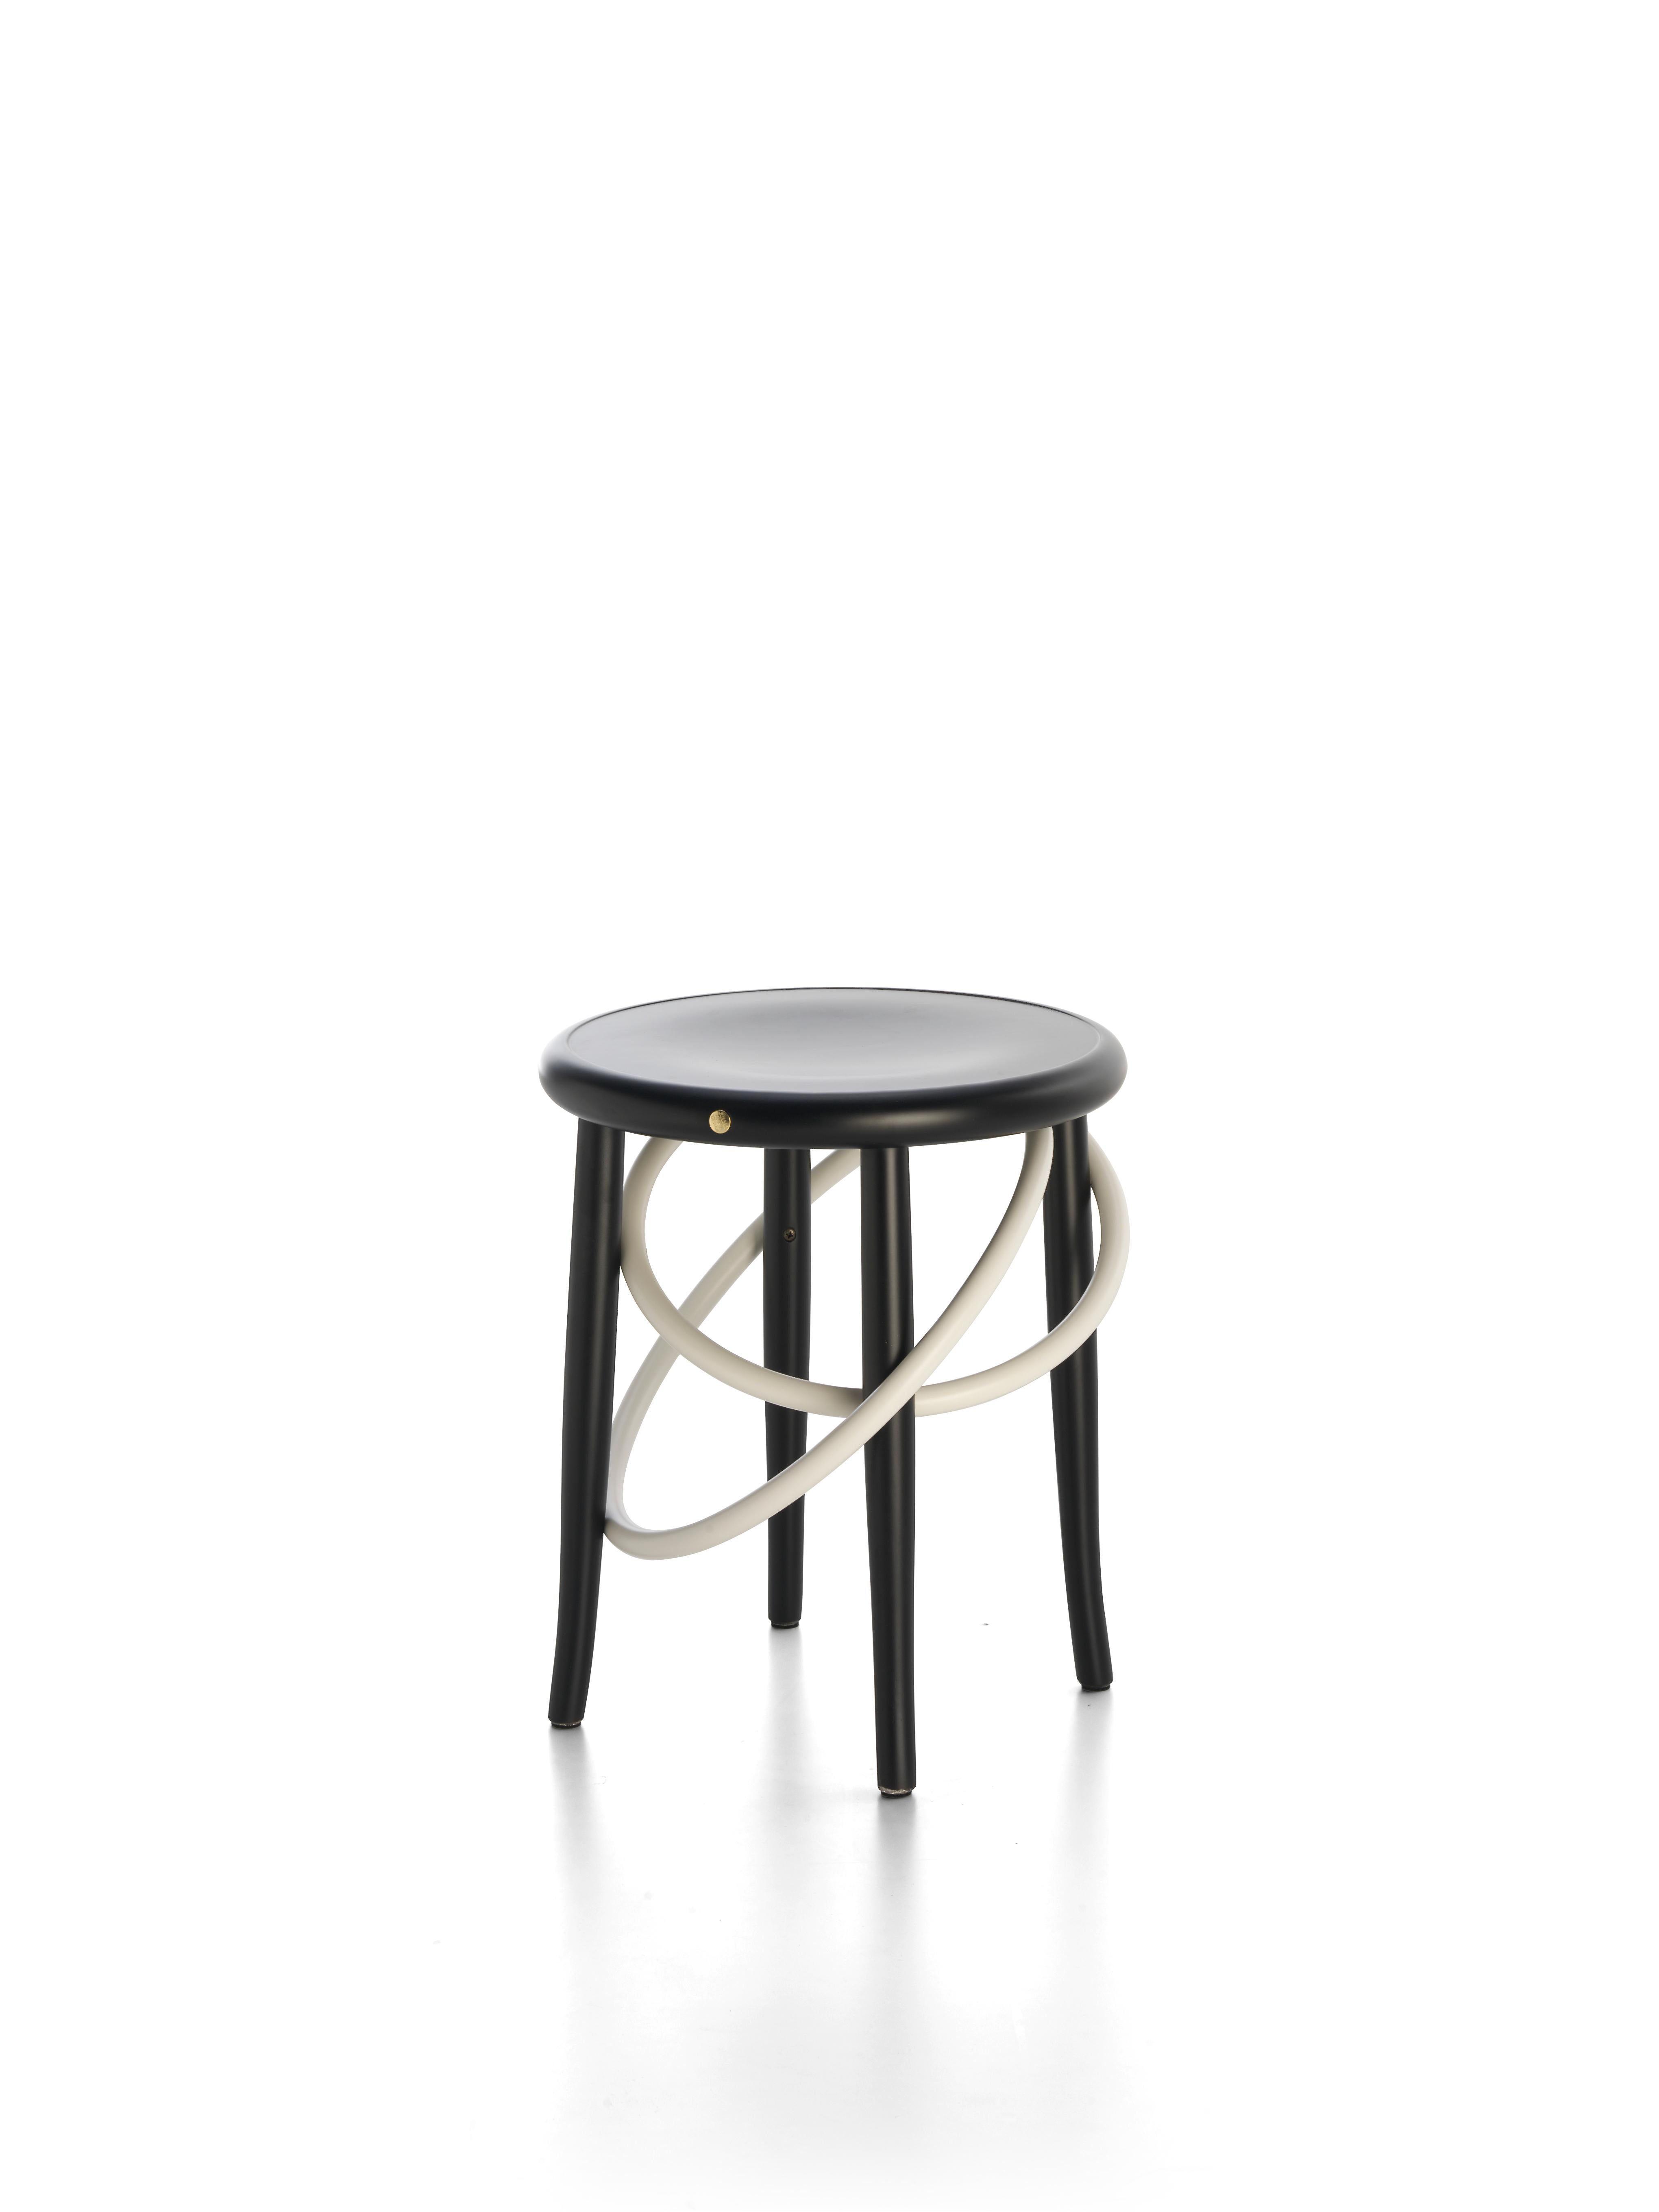 The light and playful circus theme is at the core of the Cirque family of stools designed by Martino Gamper for Wiener GTV Design. The bent element, which is the brand’s signature trait, is surprisingly and unexpectedly inserted in the base of the